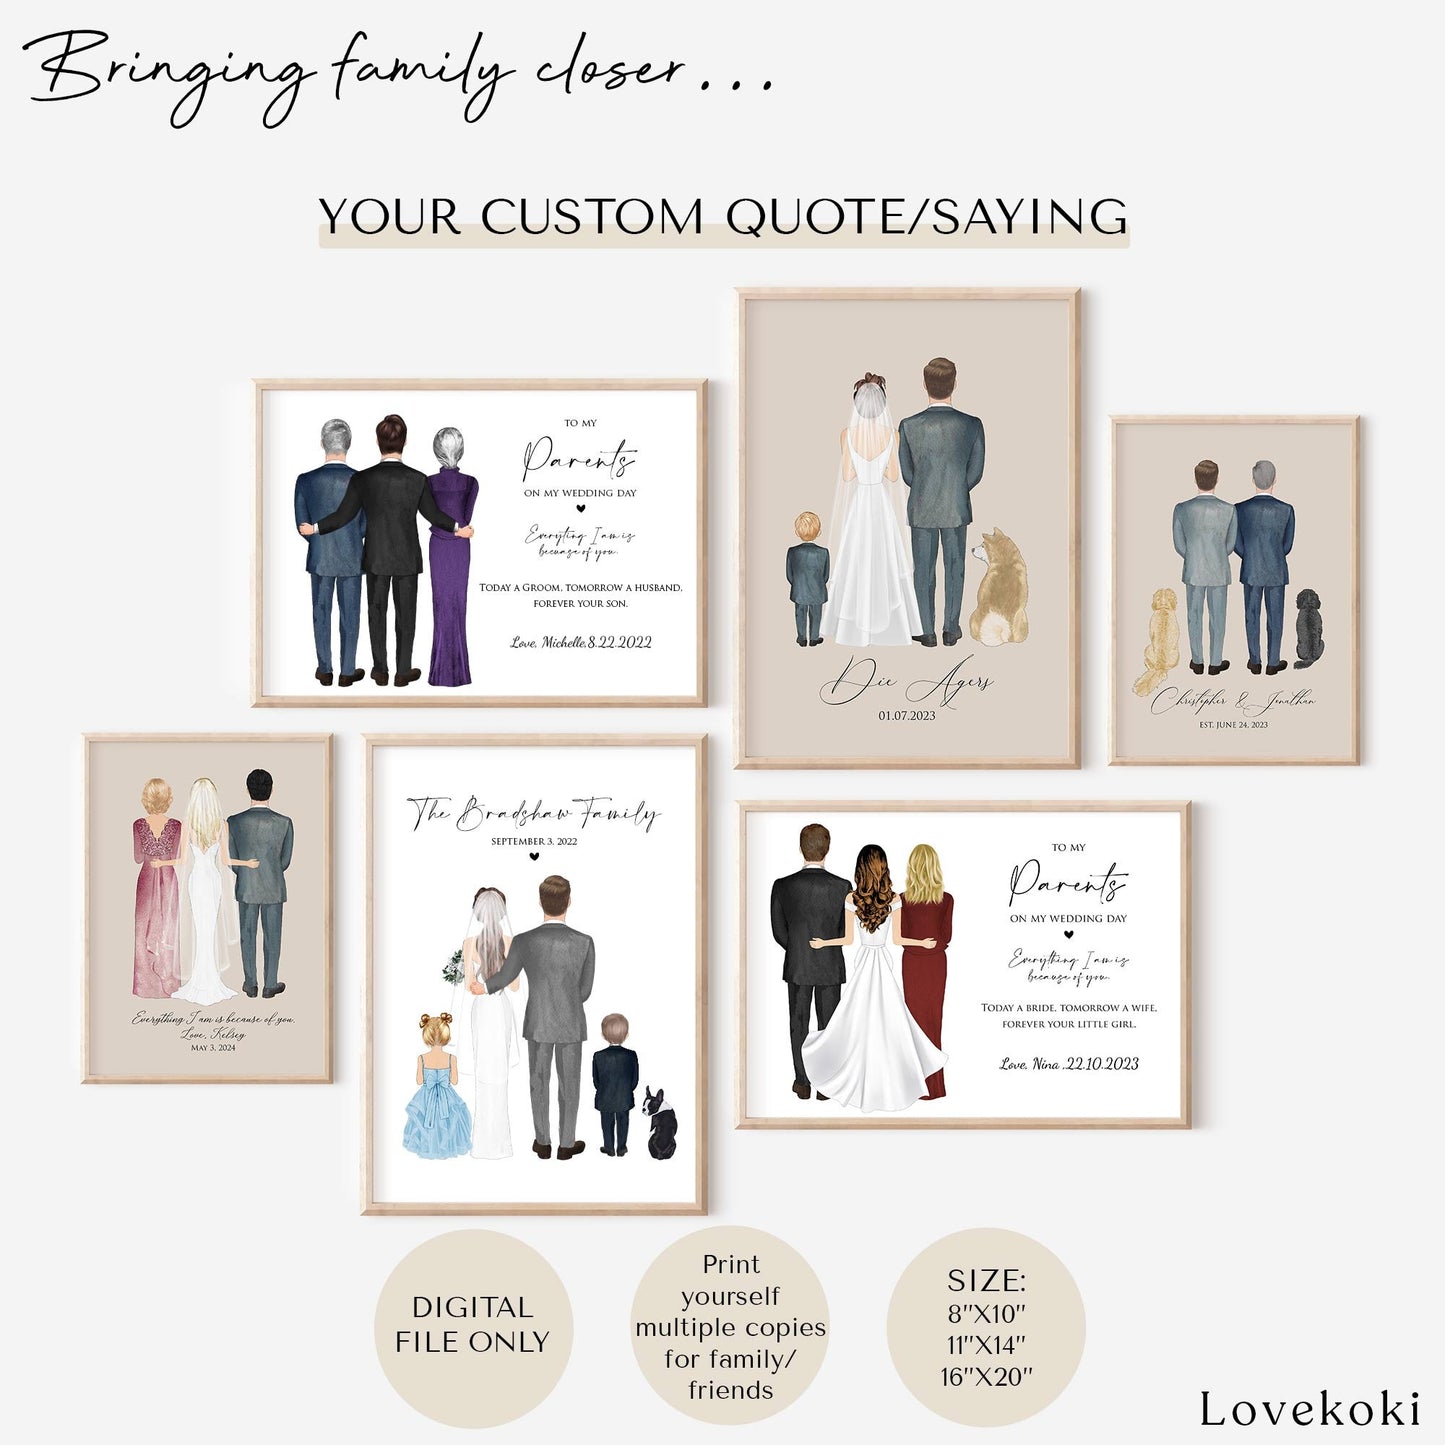 Wedding Illustration Wall Art Gift for Father of the Bride on Wedding Day